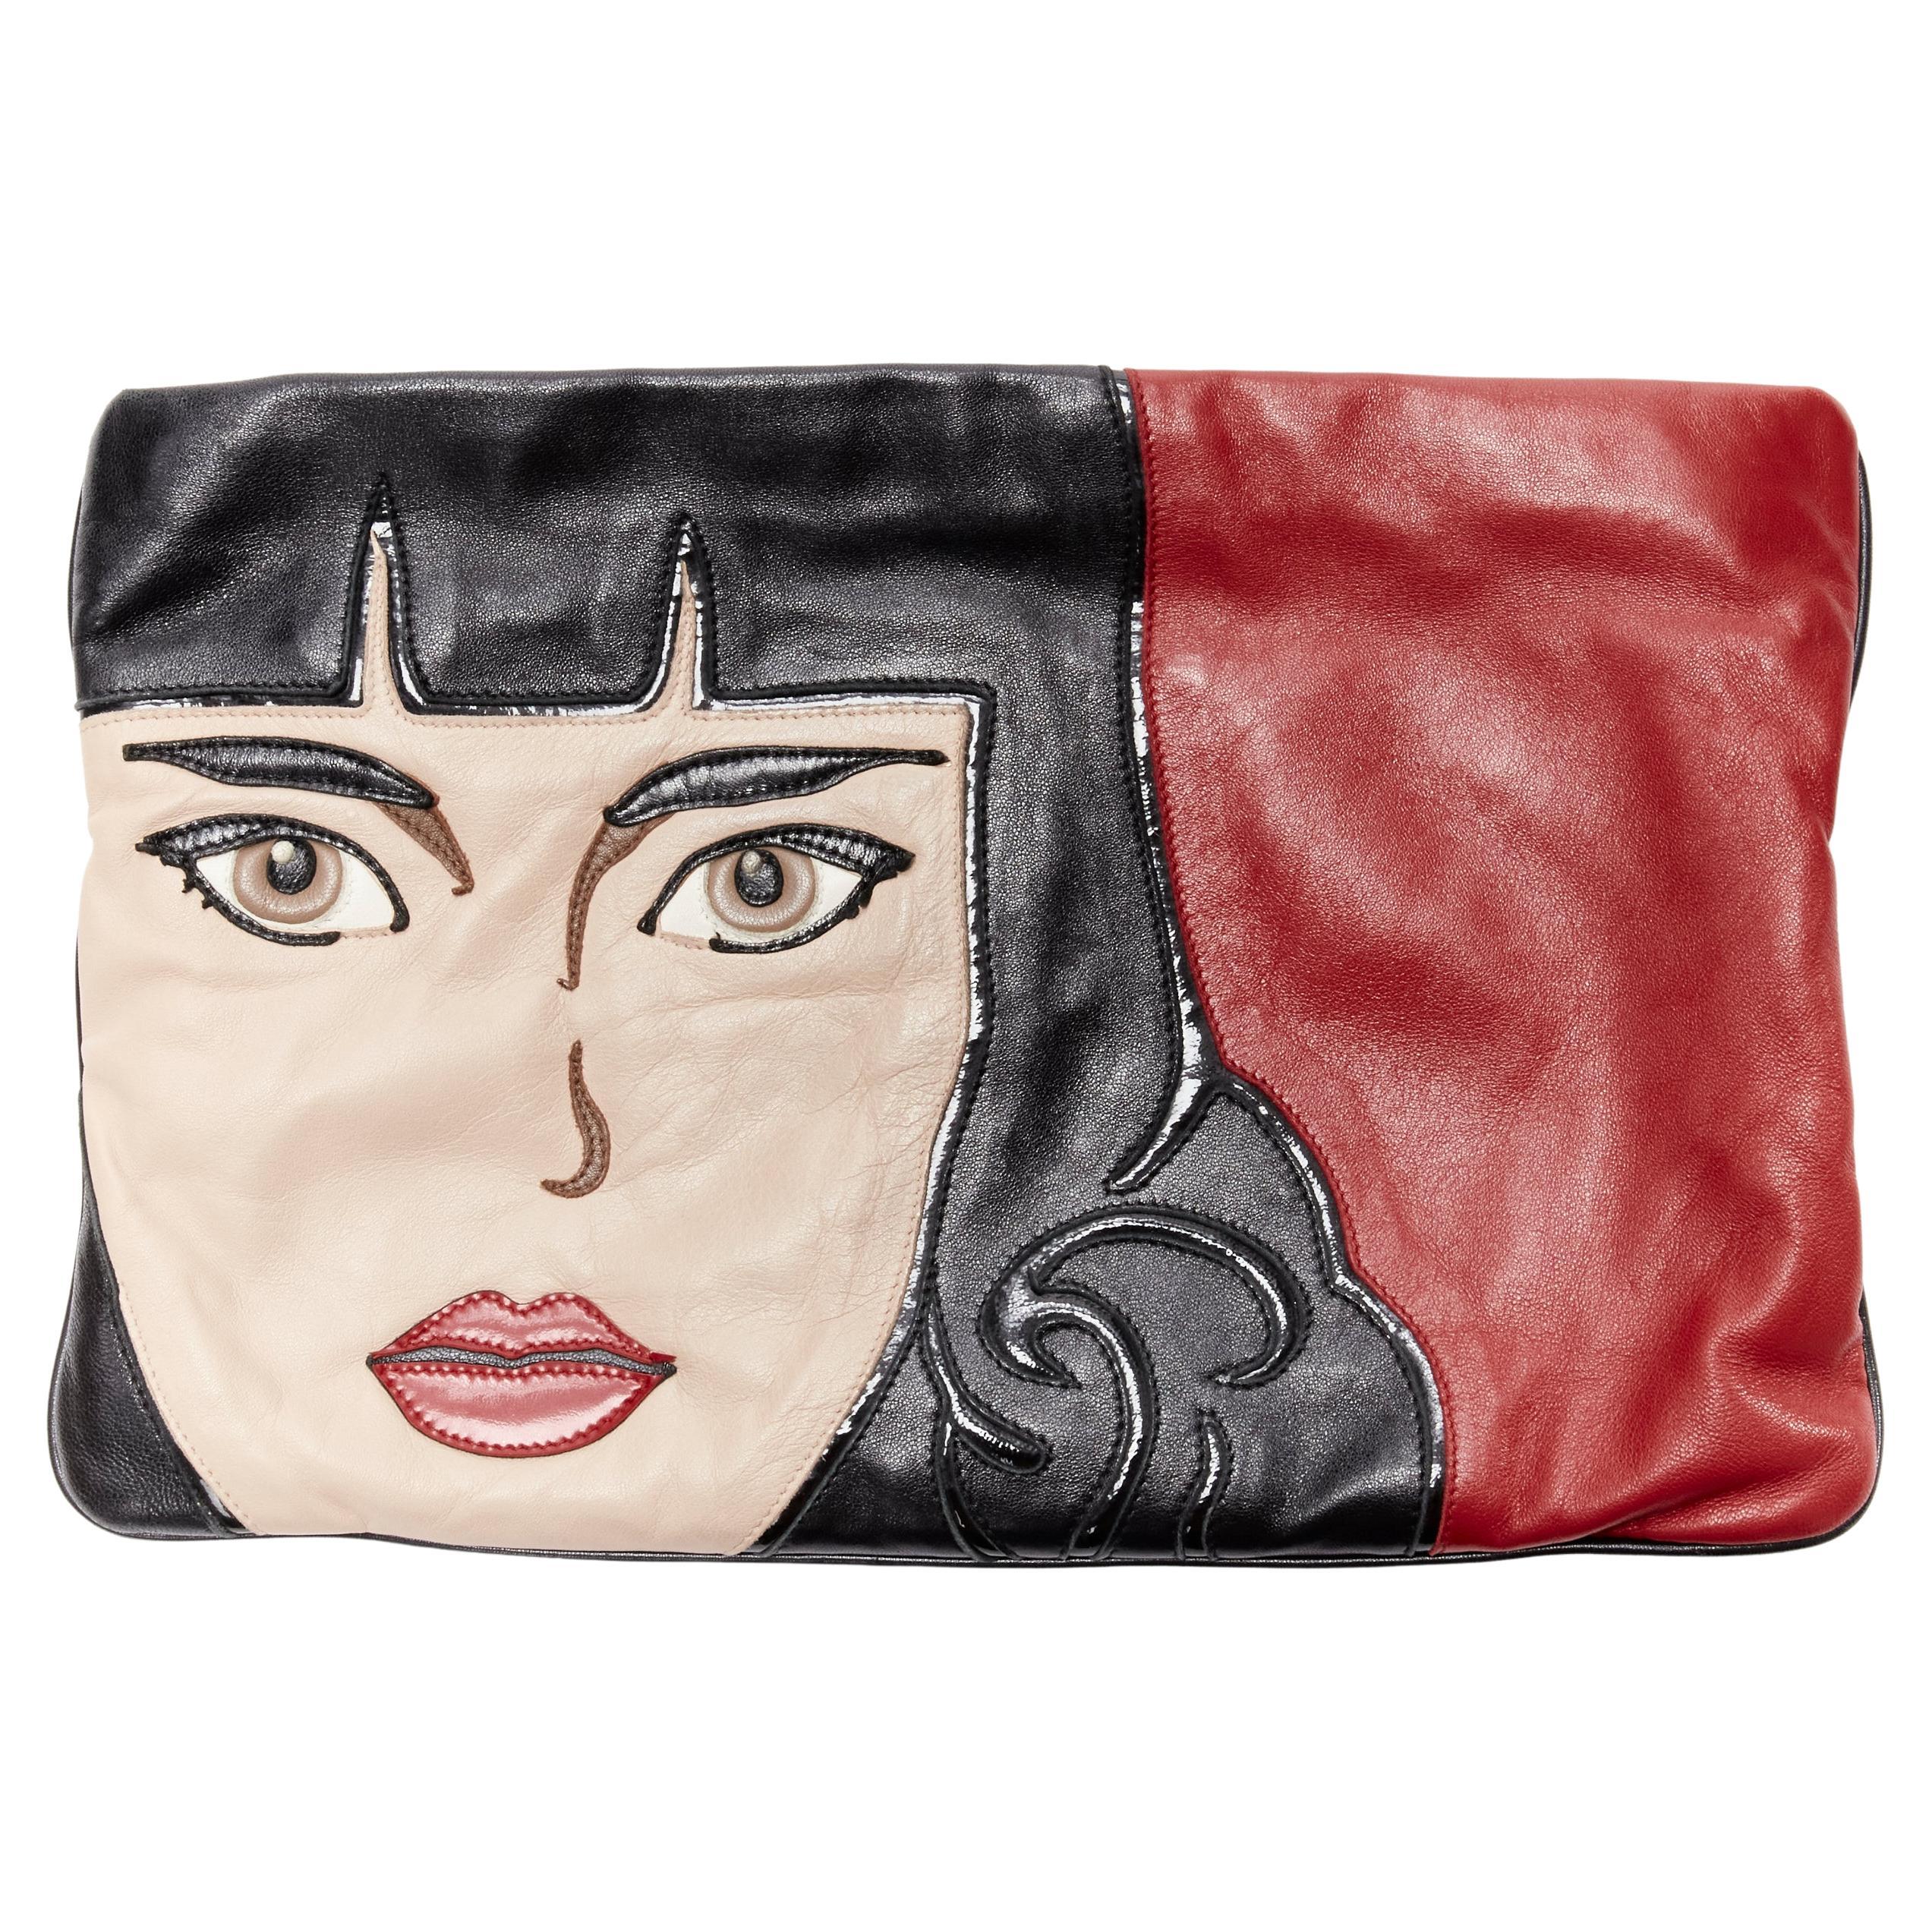 PRADA 2014 Limited Edition pop girl face black red leather oversized clutch bag